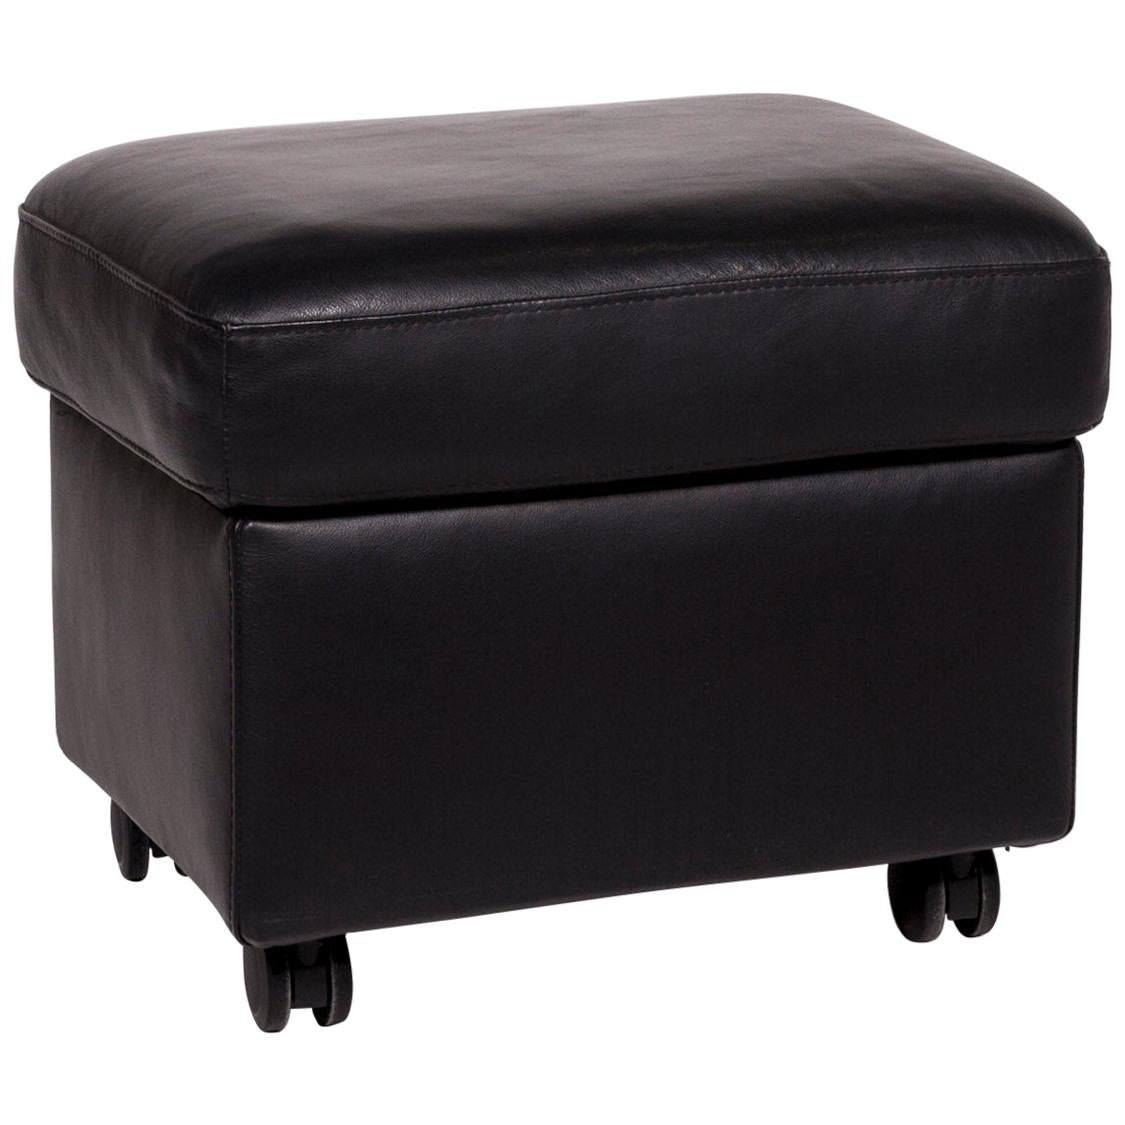 Stressless Arion Leather Stool Black Function